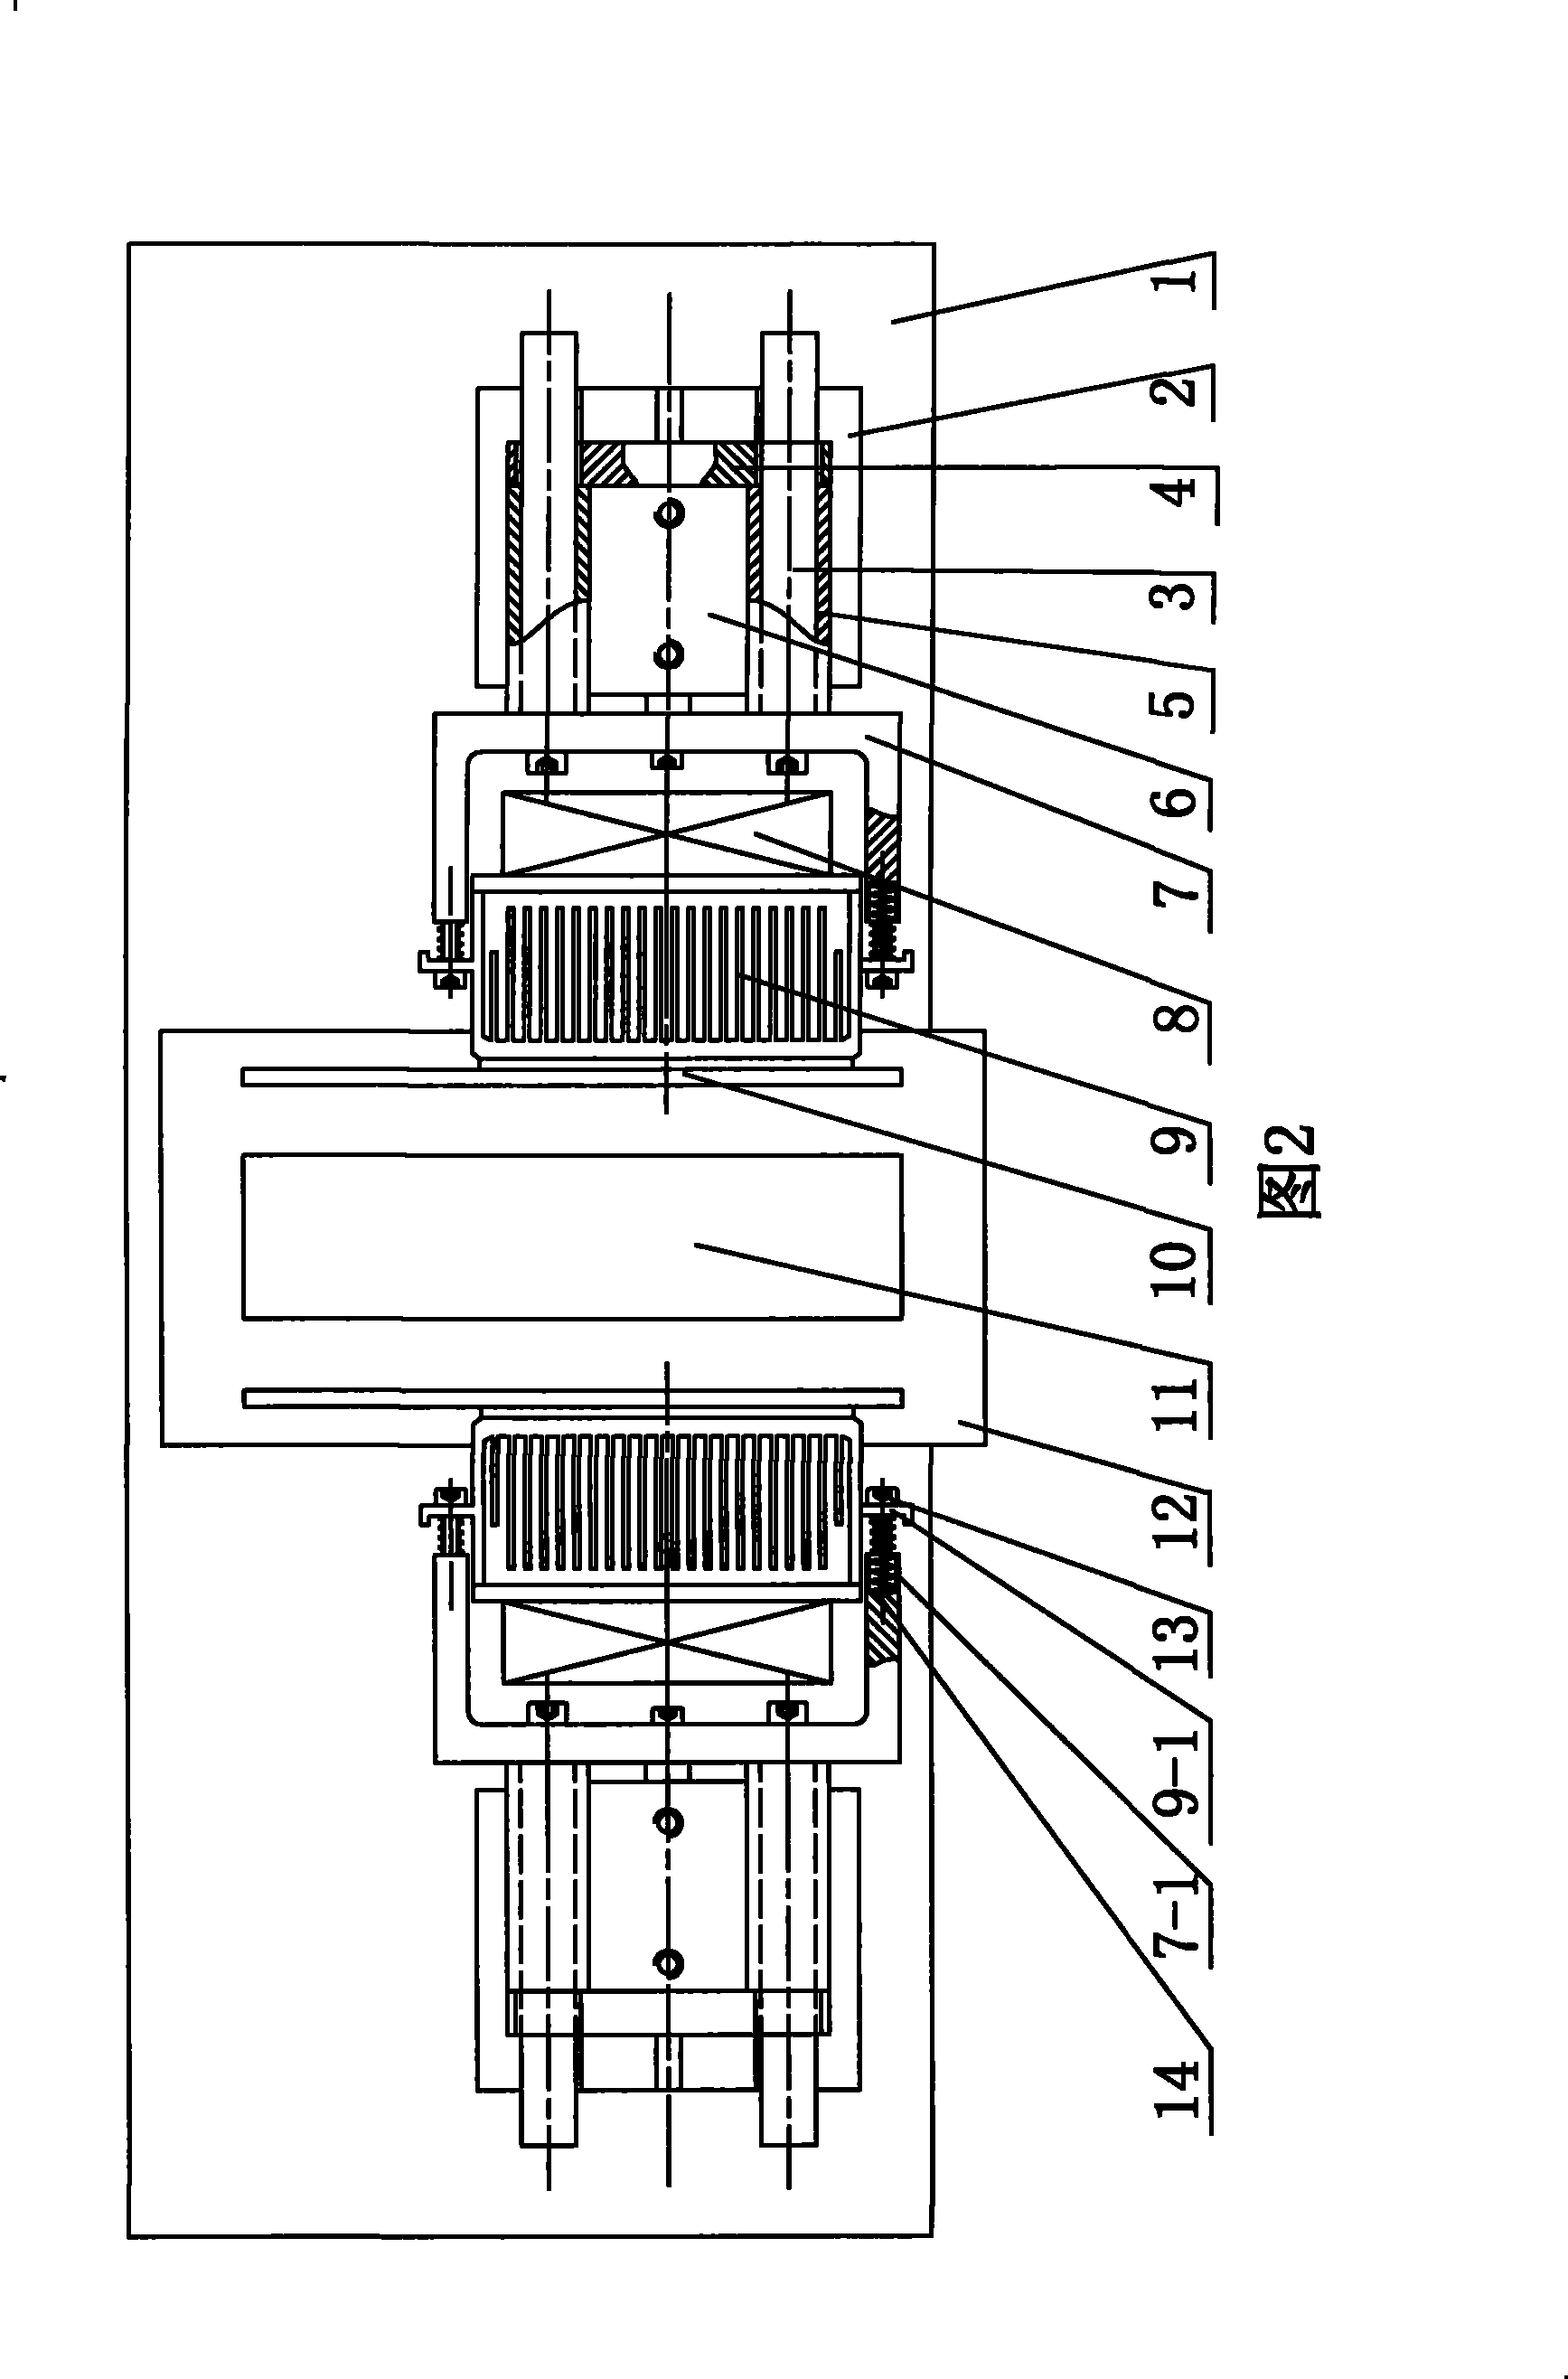 Heat conduction mechanism for temperature compensation test device of weighting transducer